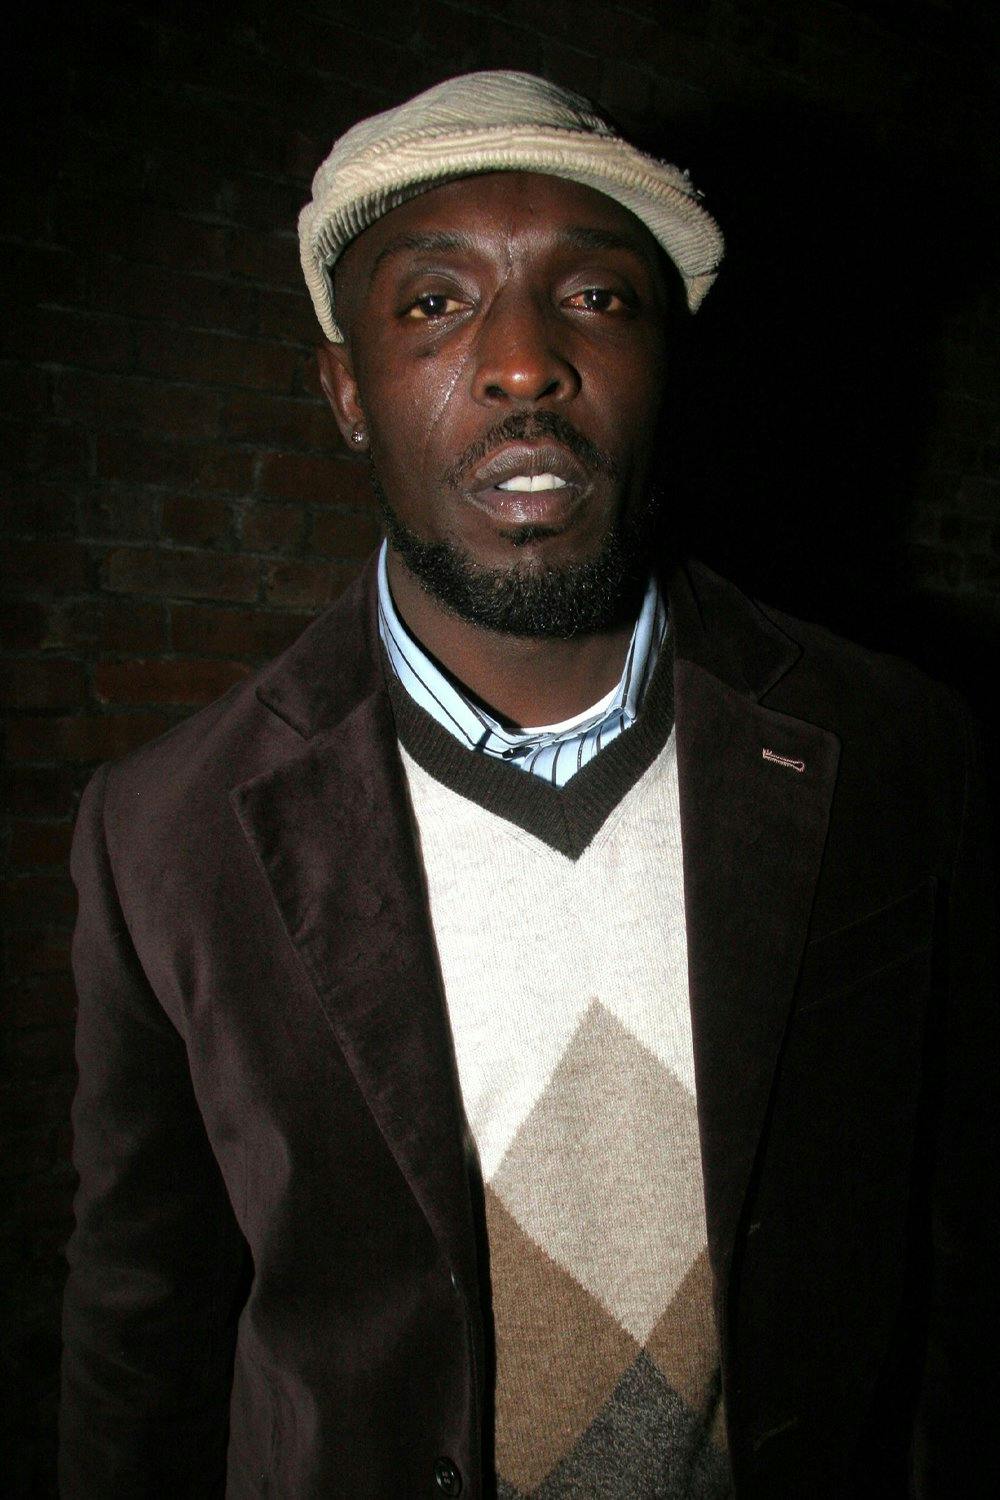 Michael Williams during Jimmy Henchman, Ed Lover and Shakim Compere Birthday Party - February 1, 2006 at Sol in New York City, New York, United States. 